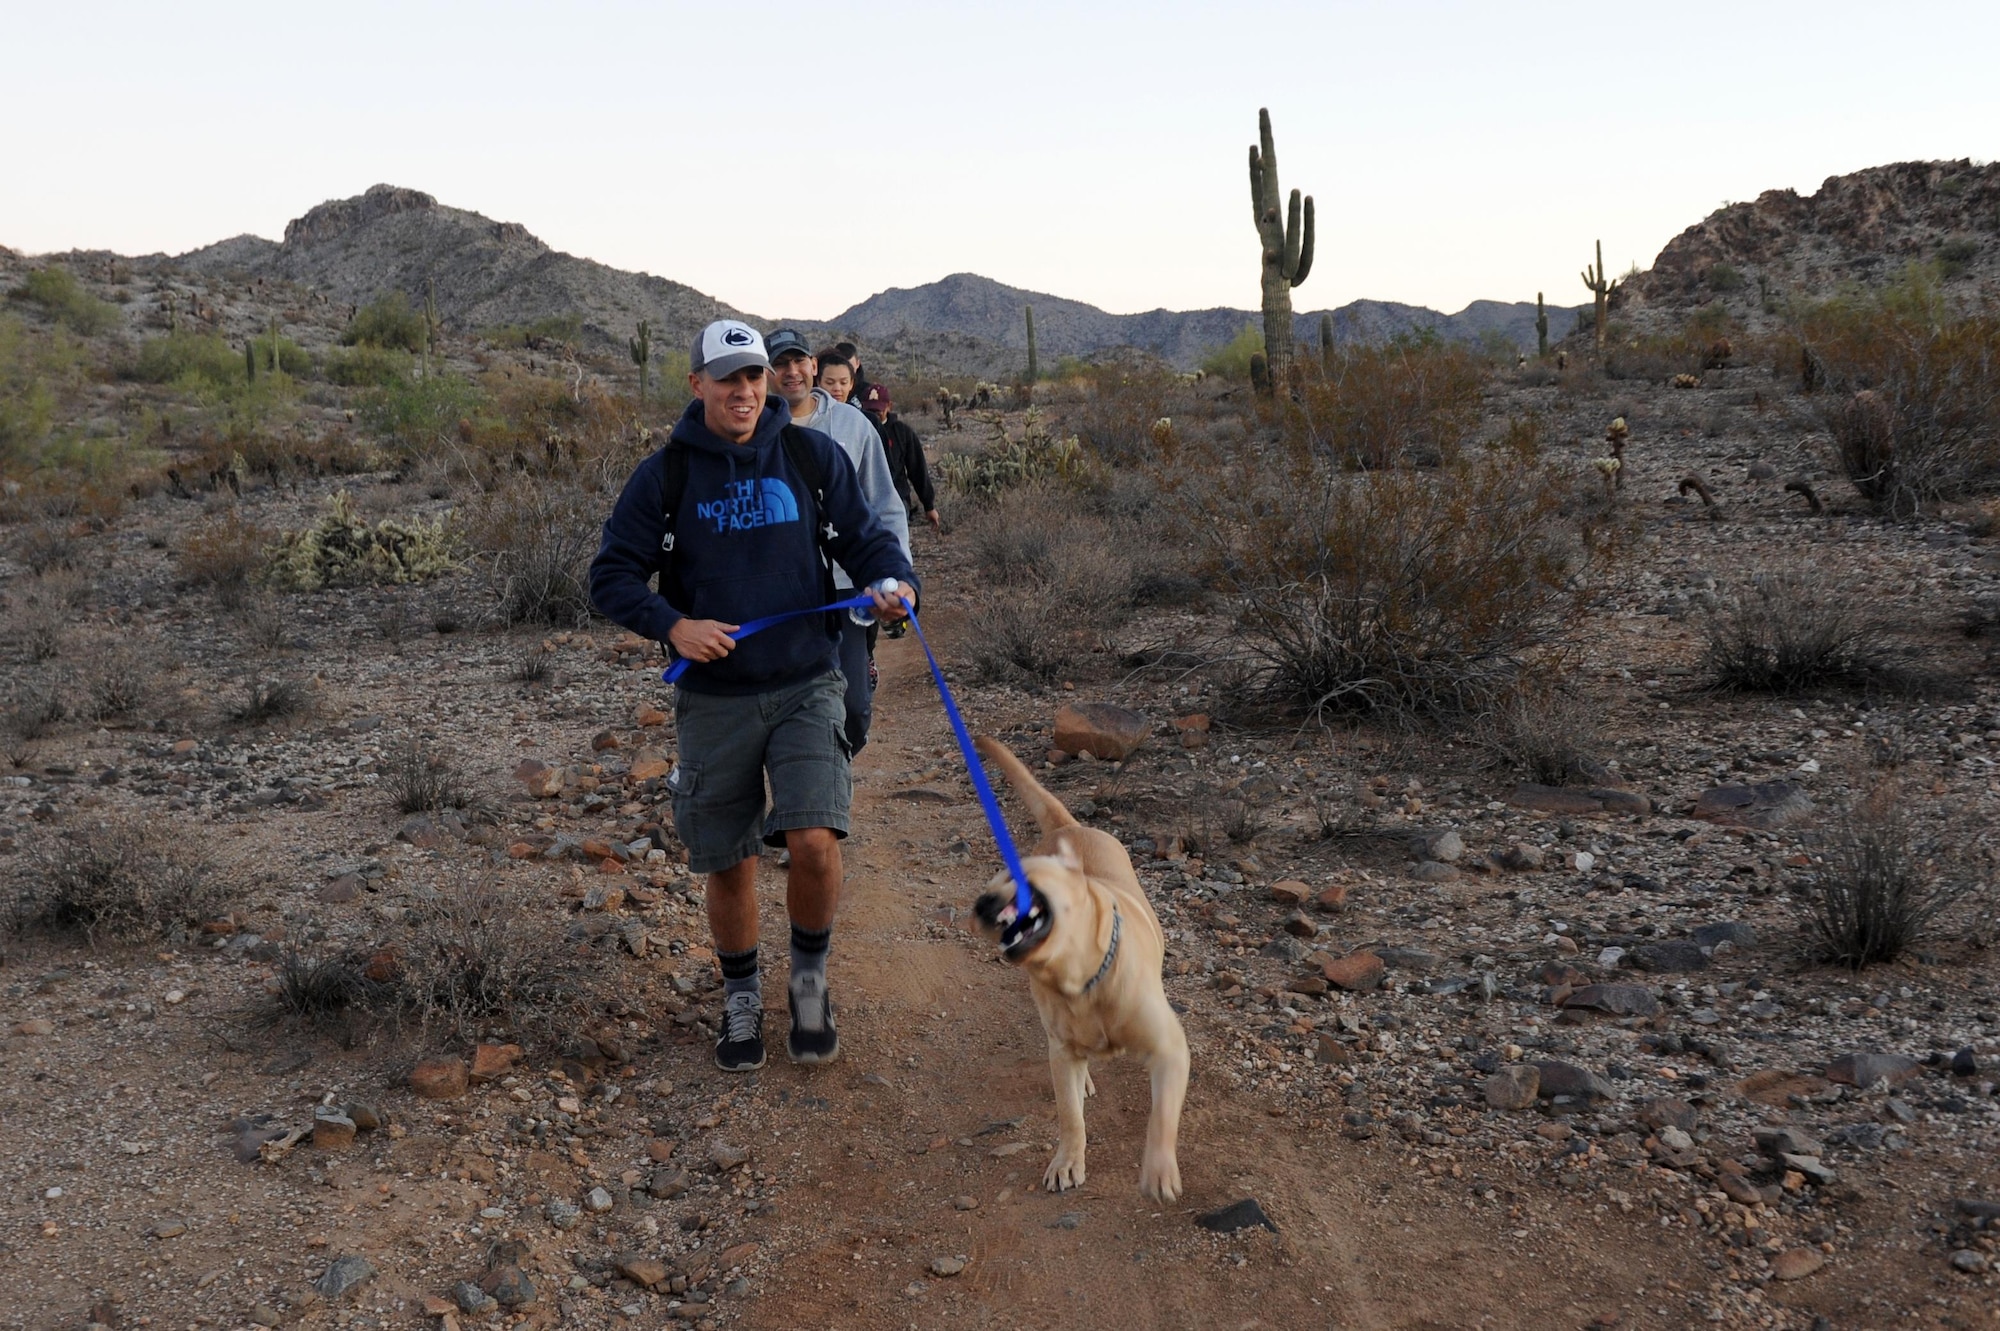 Senior Master Sgt. Mark James, 56th Maintenance Group maintenance operations flight training flight superintendent, hikes with his dog Nov. 18, 2016 at the White Tank Mountains in Surprise, Ariz. The 56th MXG held a monthly hike to build morale and leadership.(U.S. Air Force photo by Airman 1st Class Pedro Mota)